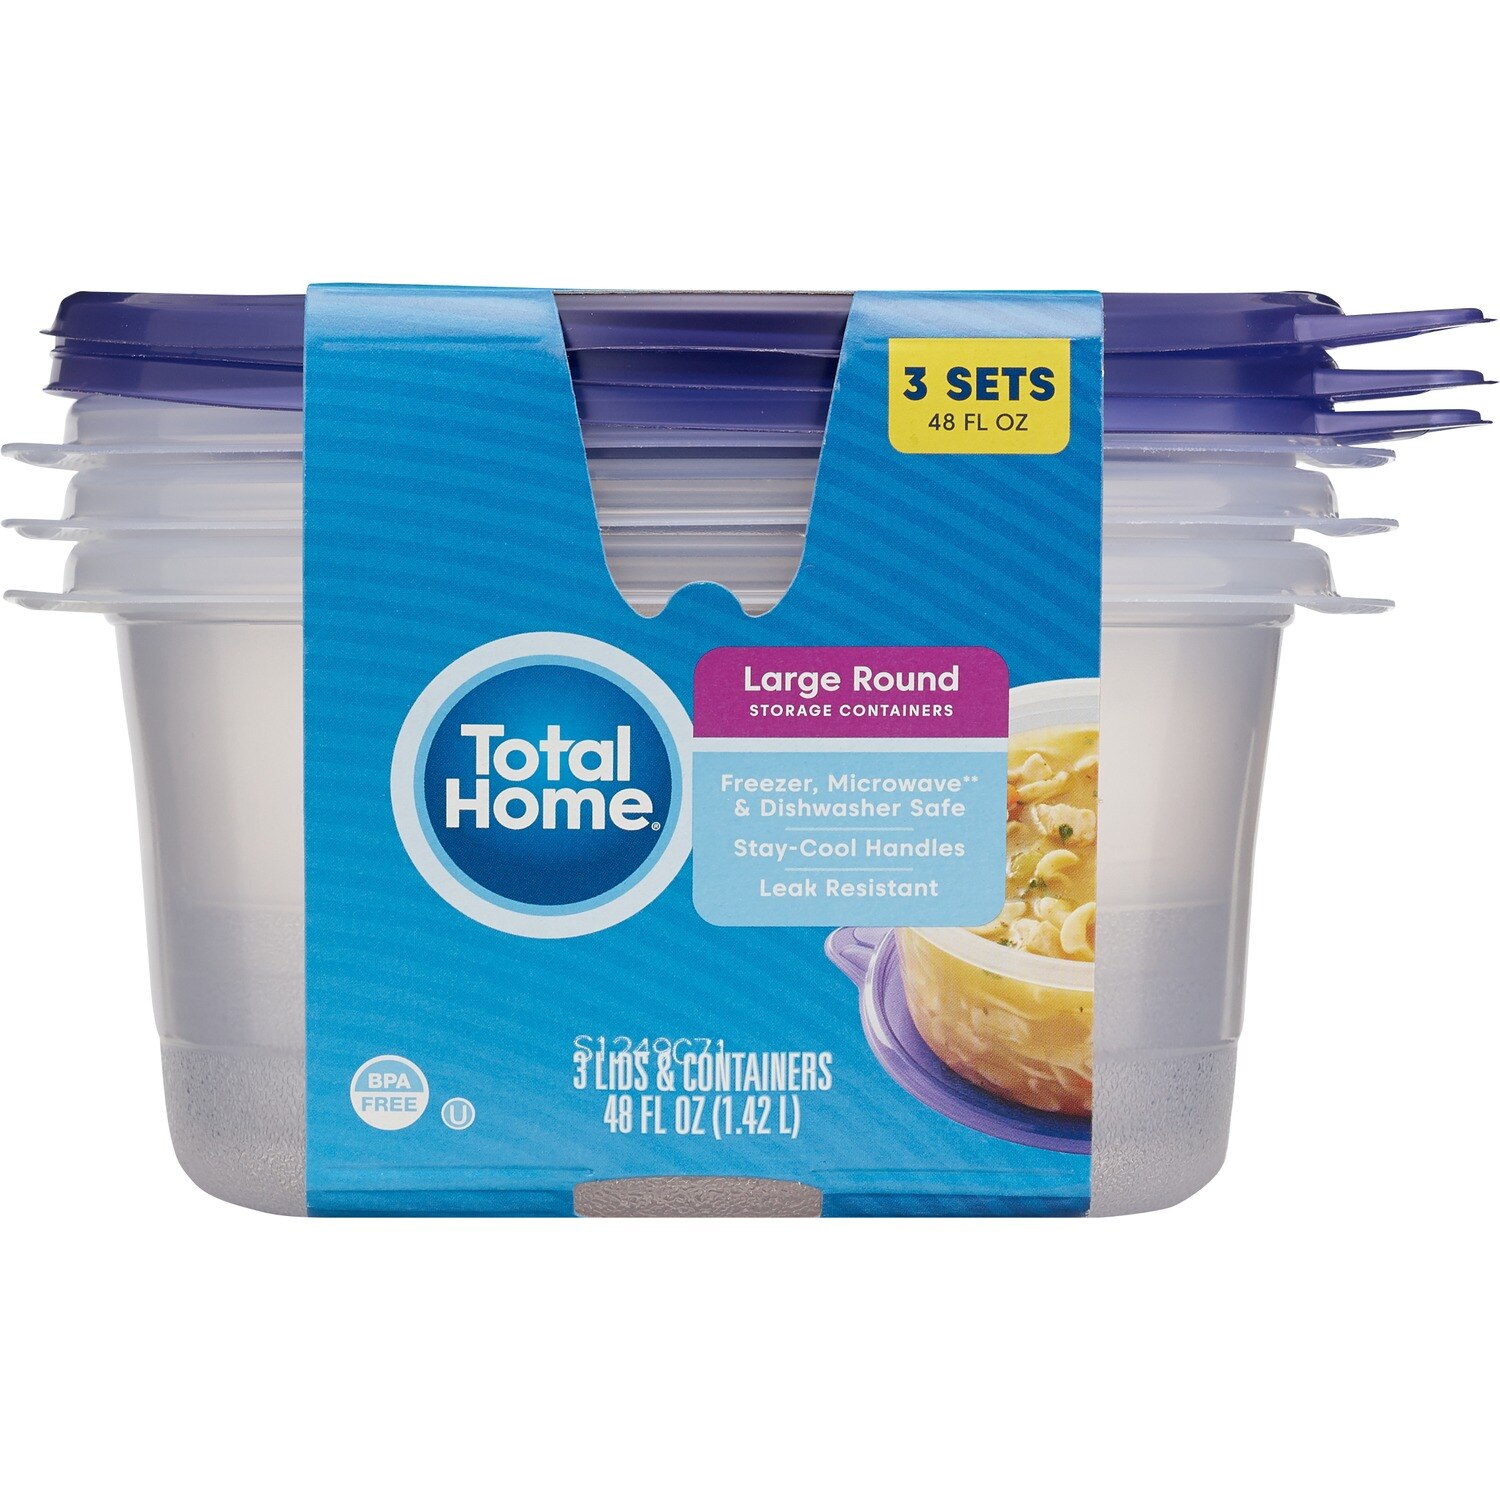 Total Home Big Bowl Storage Containers, 3CT